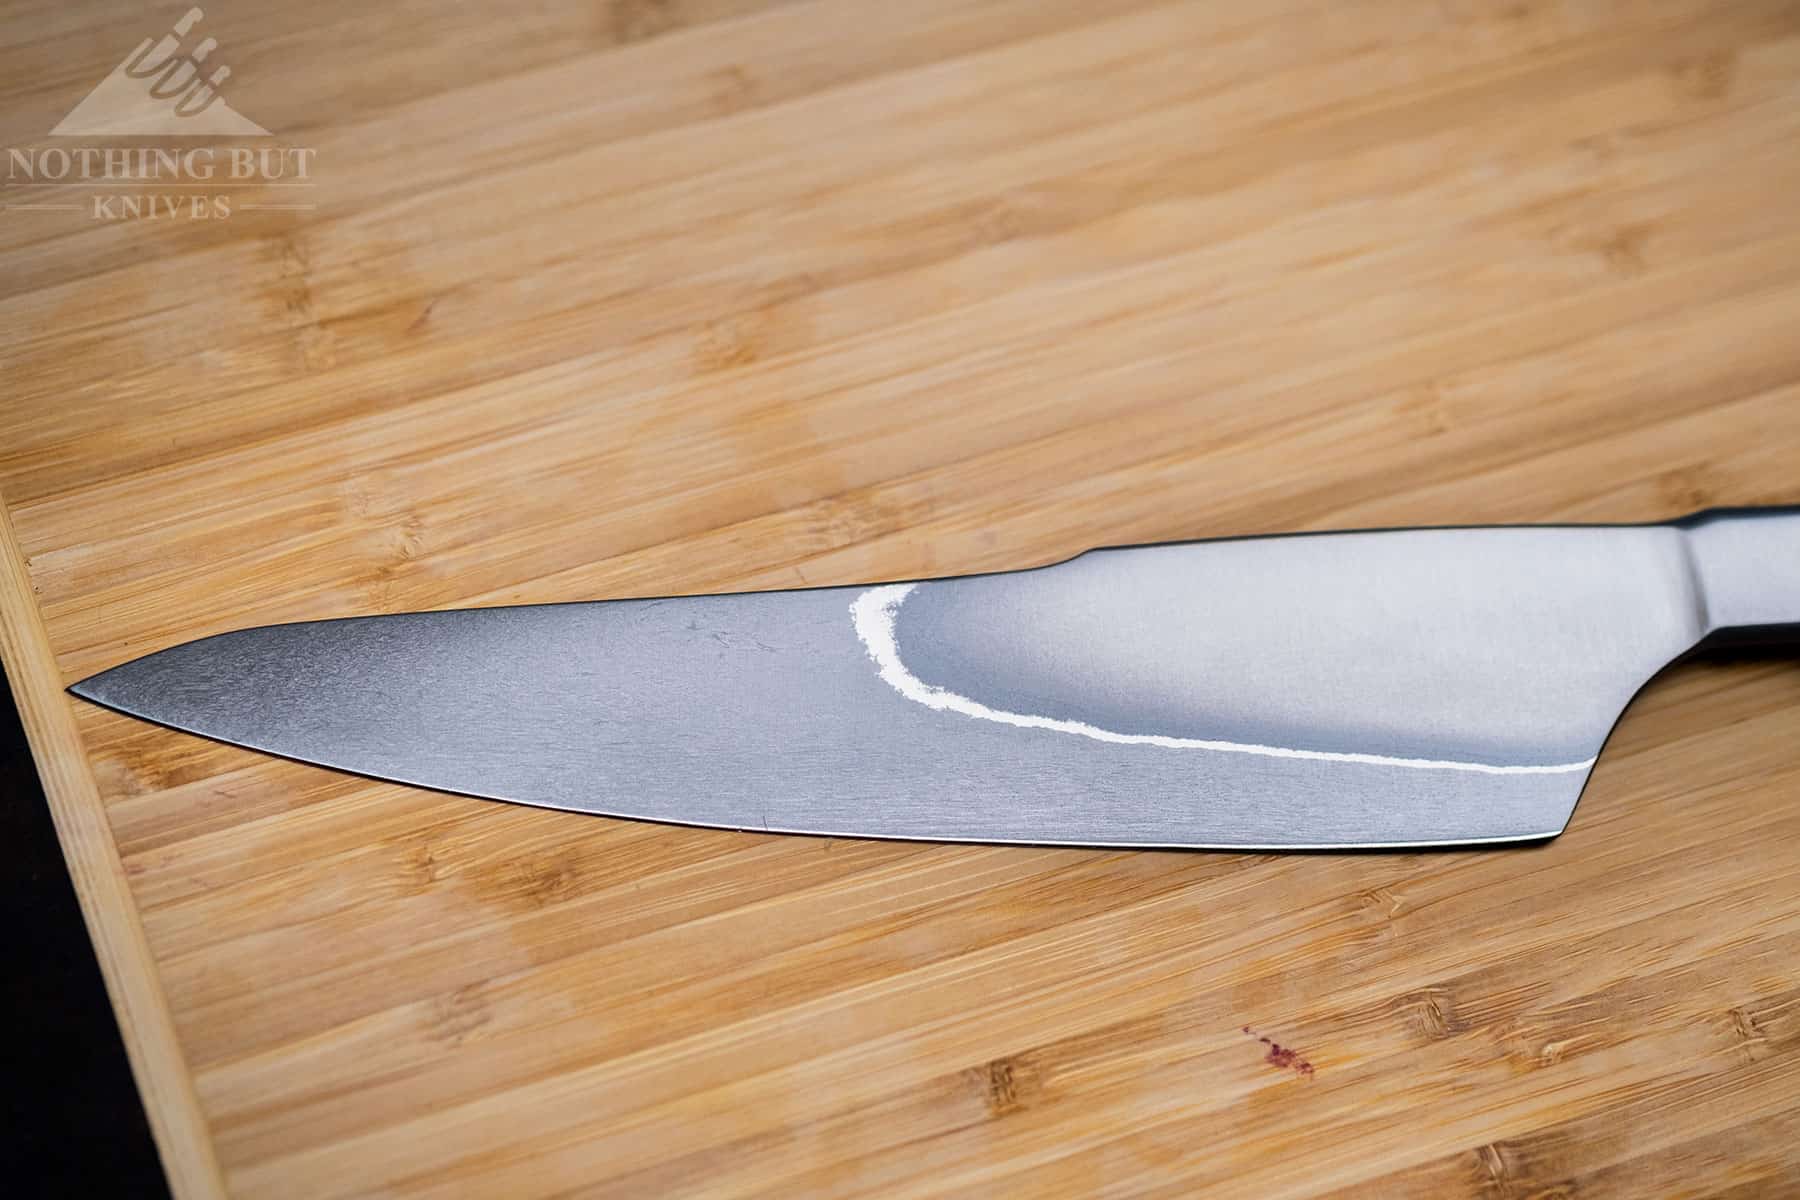 Xin Cutlery XinCraft 8.4 Chef's Knife Review